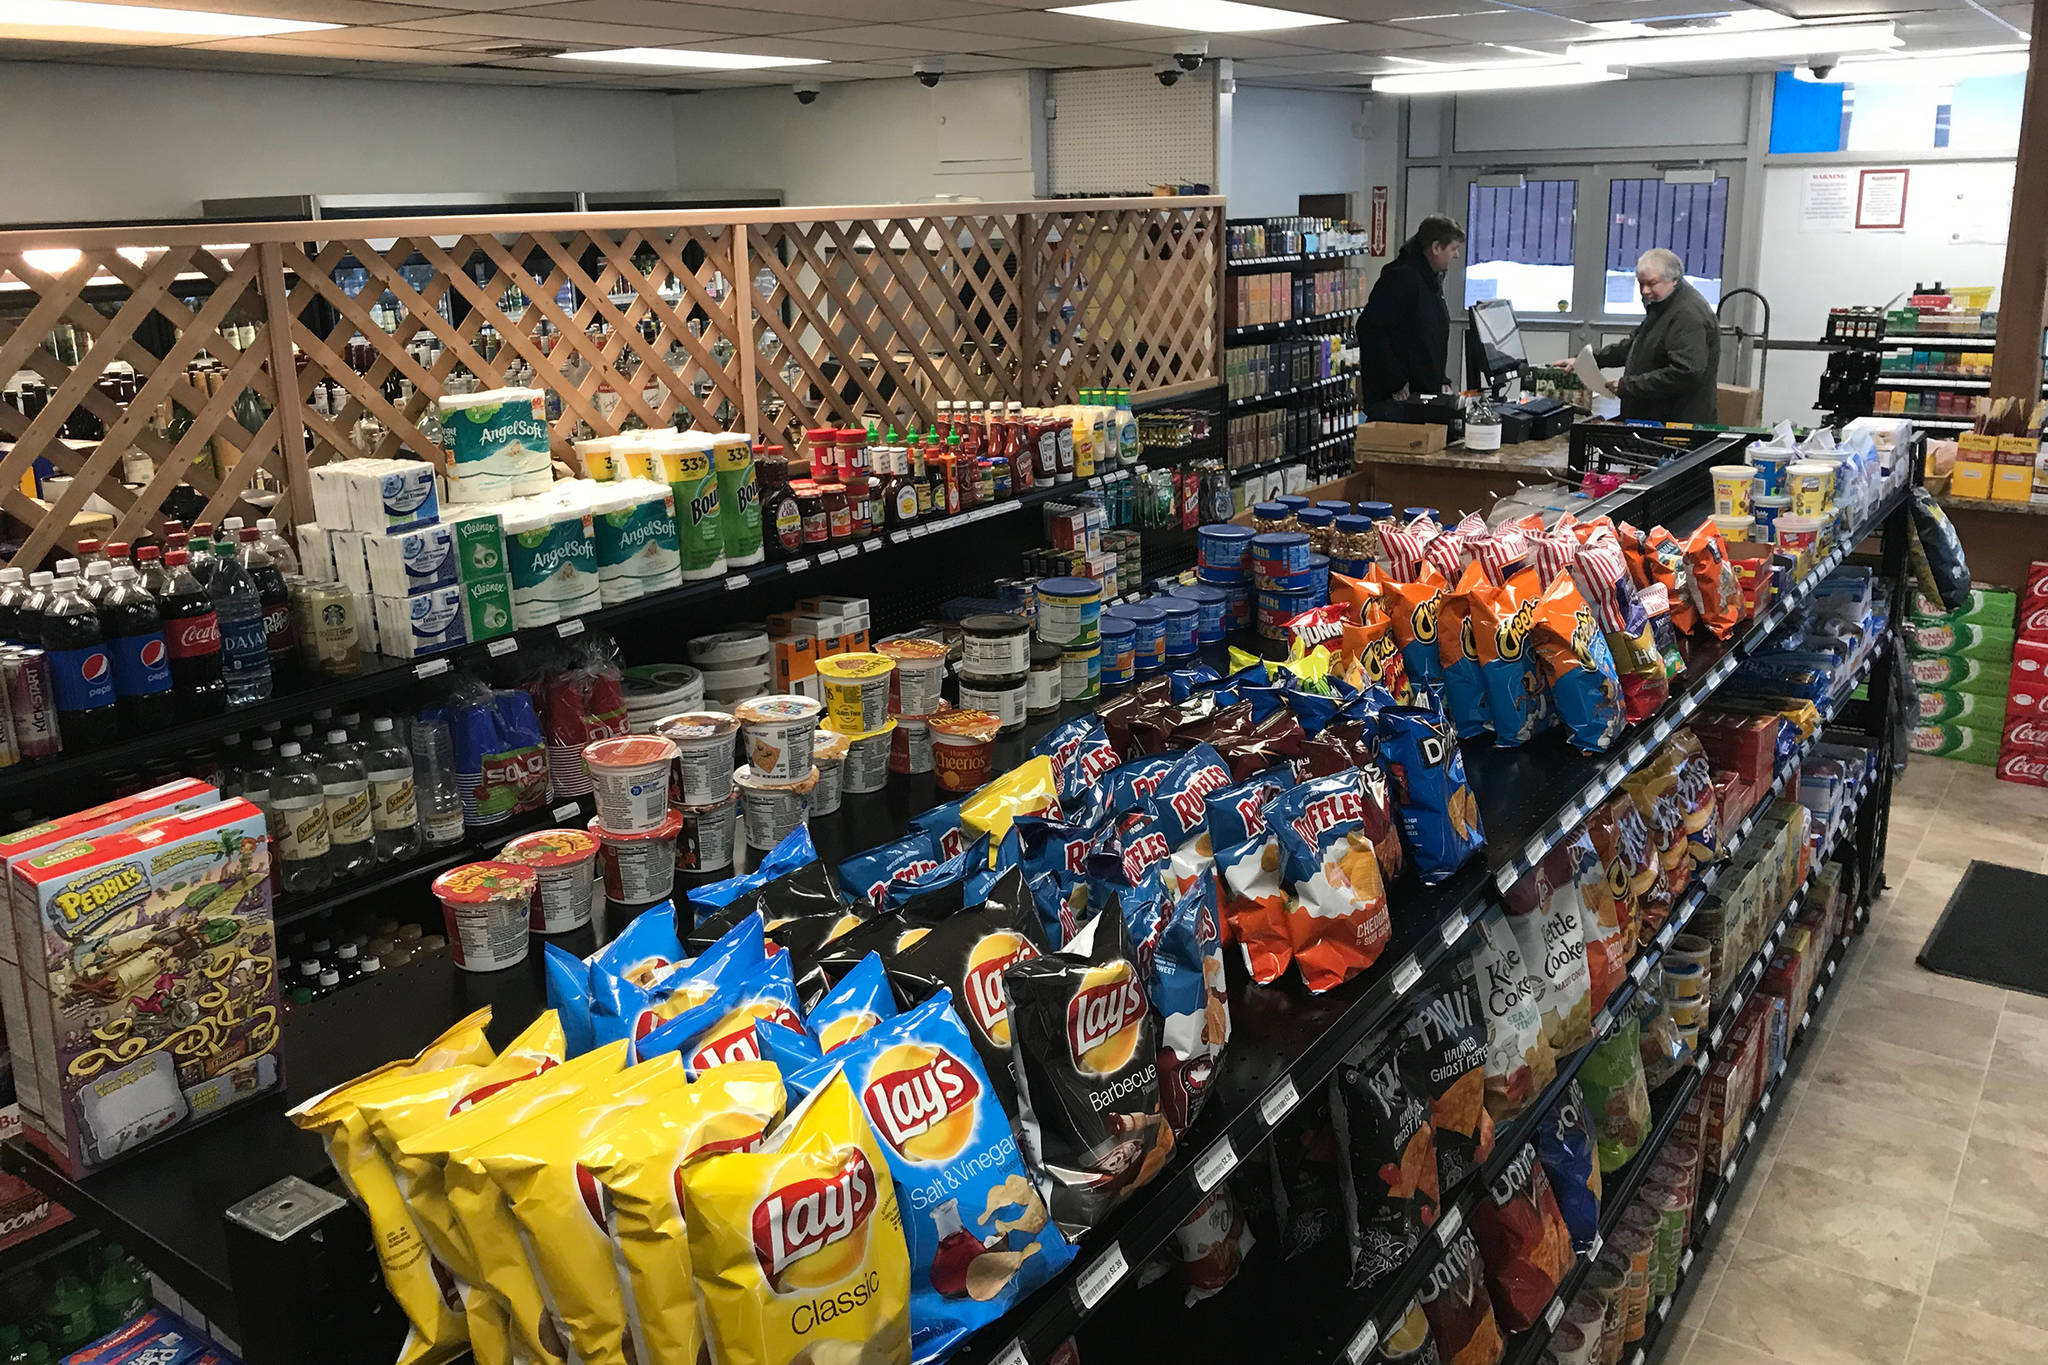 The interior of the Douglas Depot is pictured on Dec. 24, 2018. The convenience store and gas station opened in November. (Alex McCarthy | Juneau Empire)